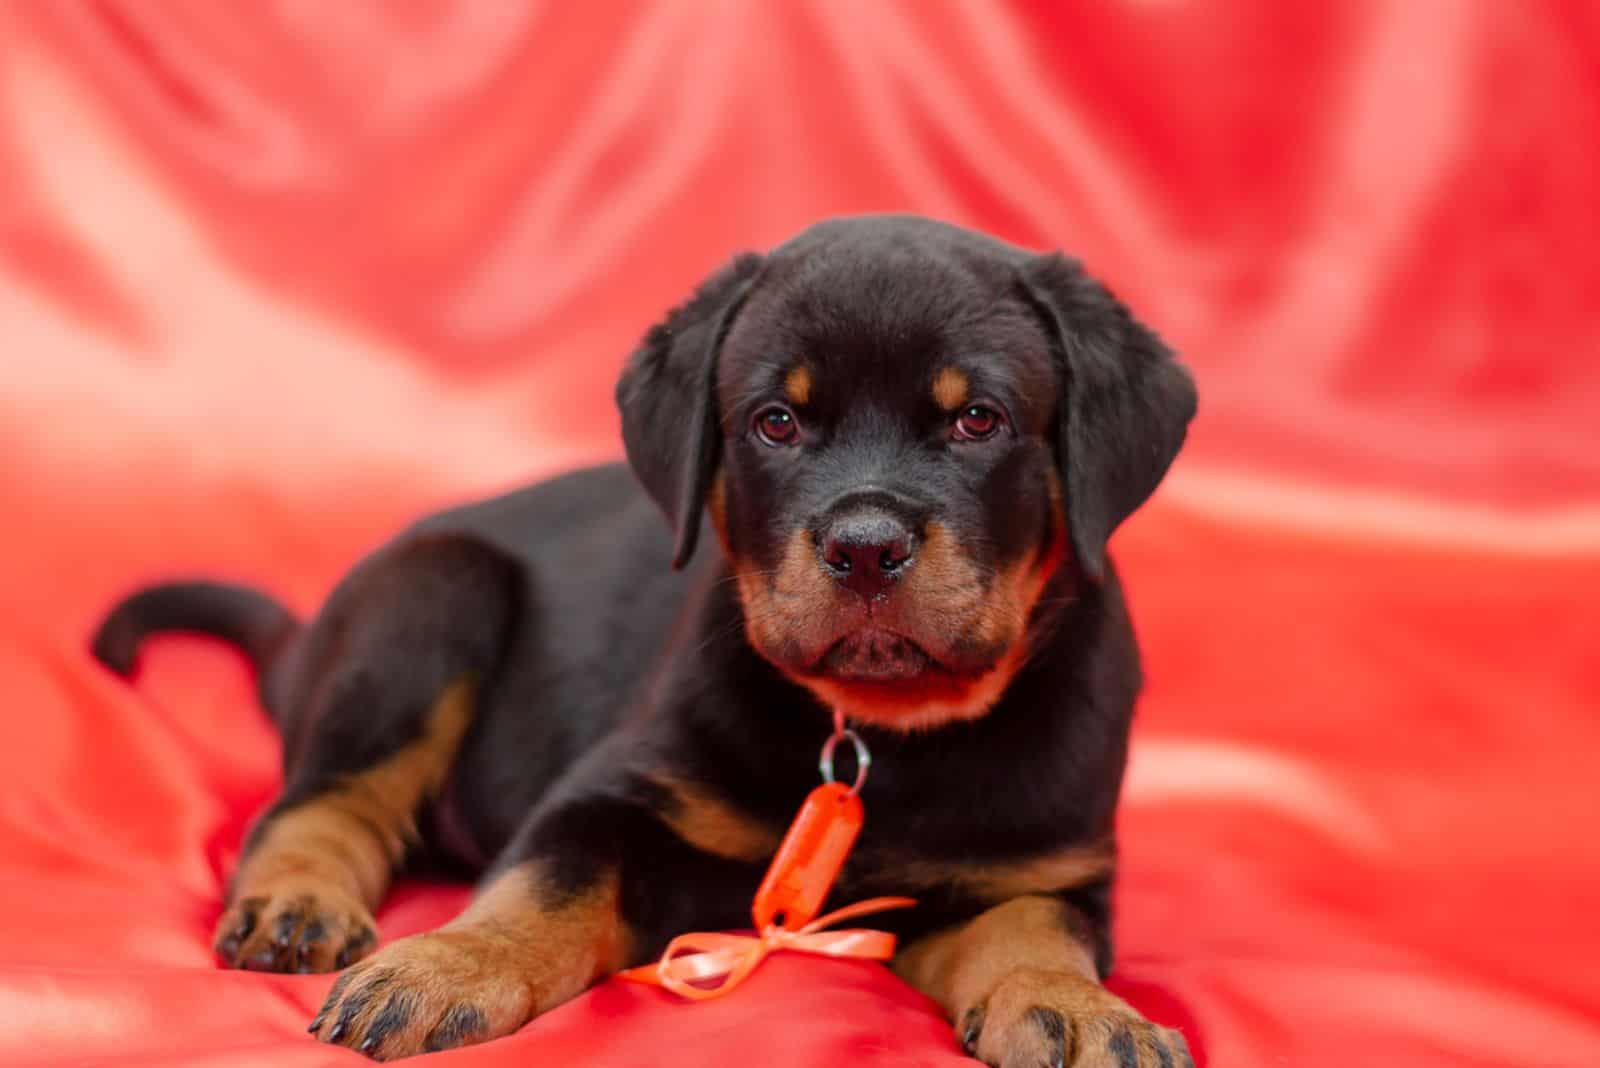 Rottweiler puppy on a red background